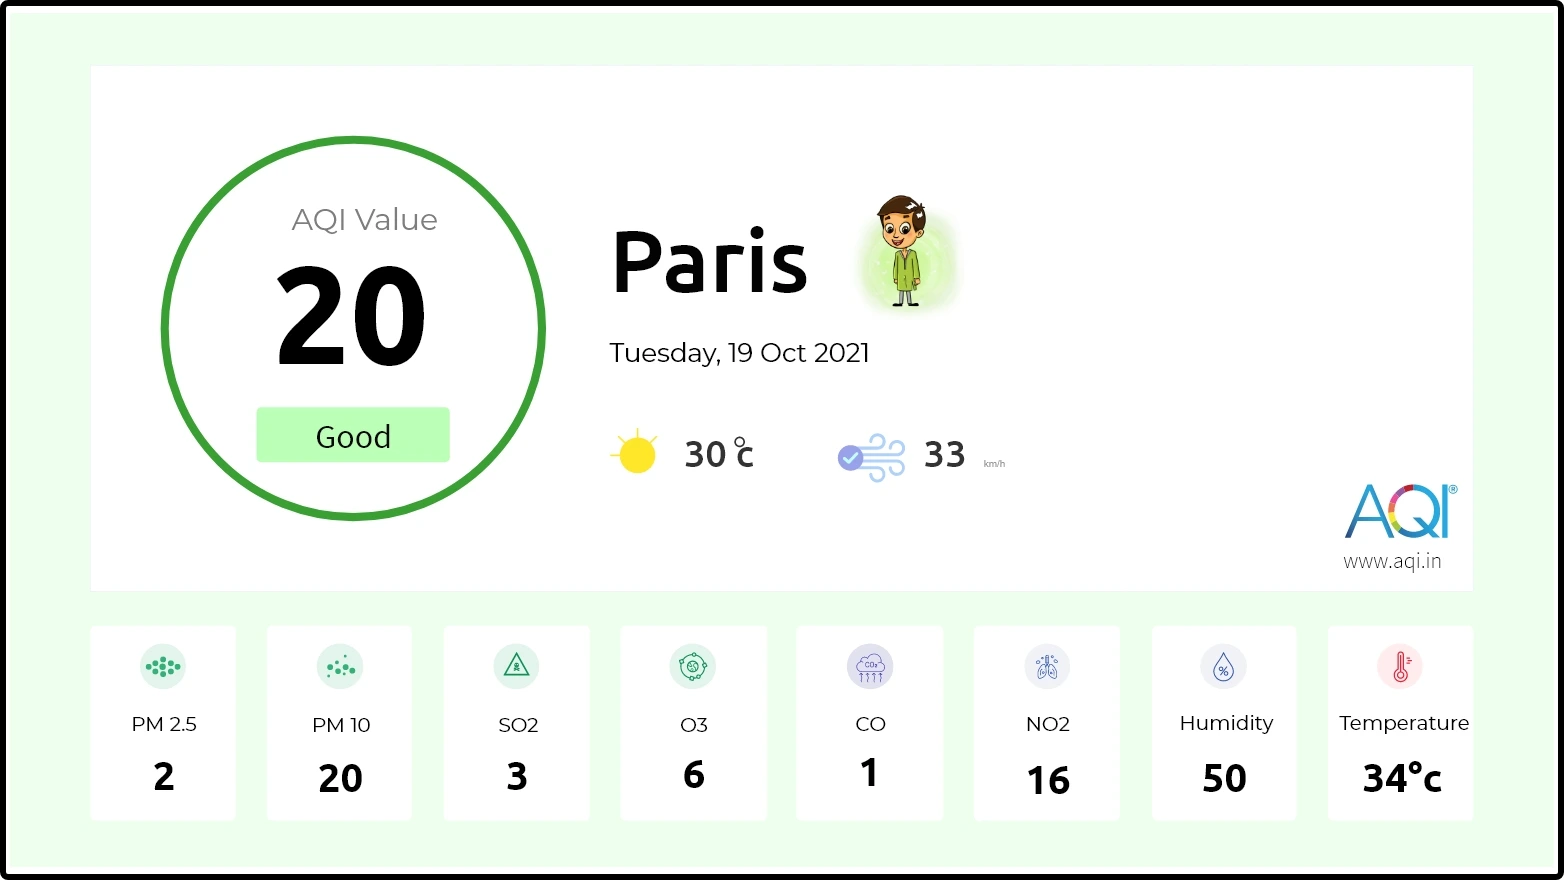 digital signage air quality index app preview showing AQI value and other air quality parameters for Paris location